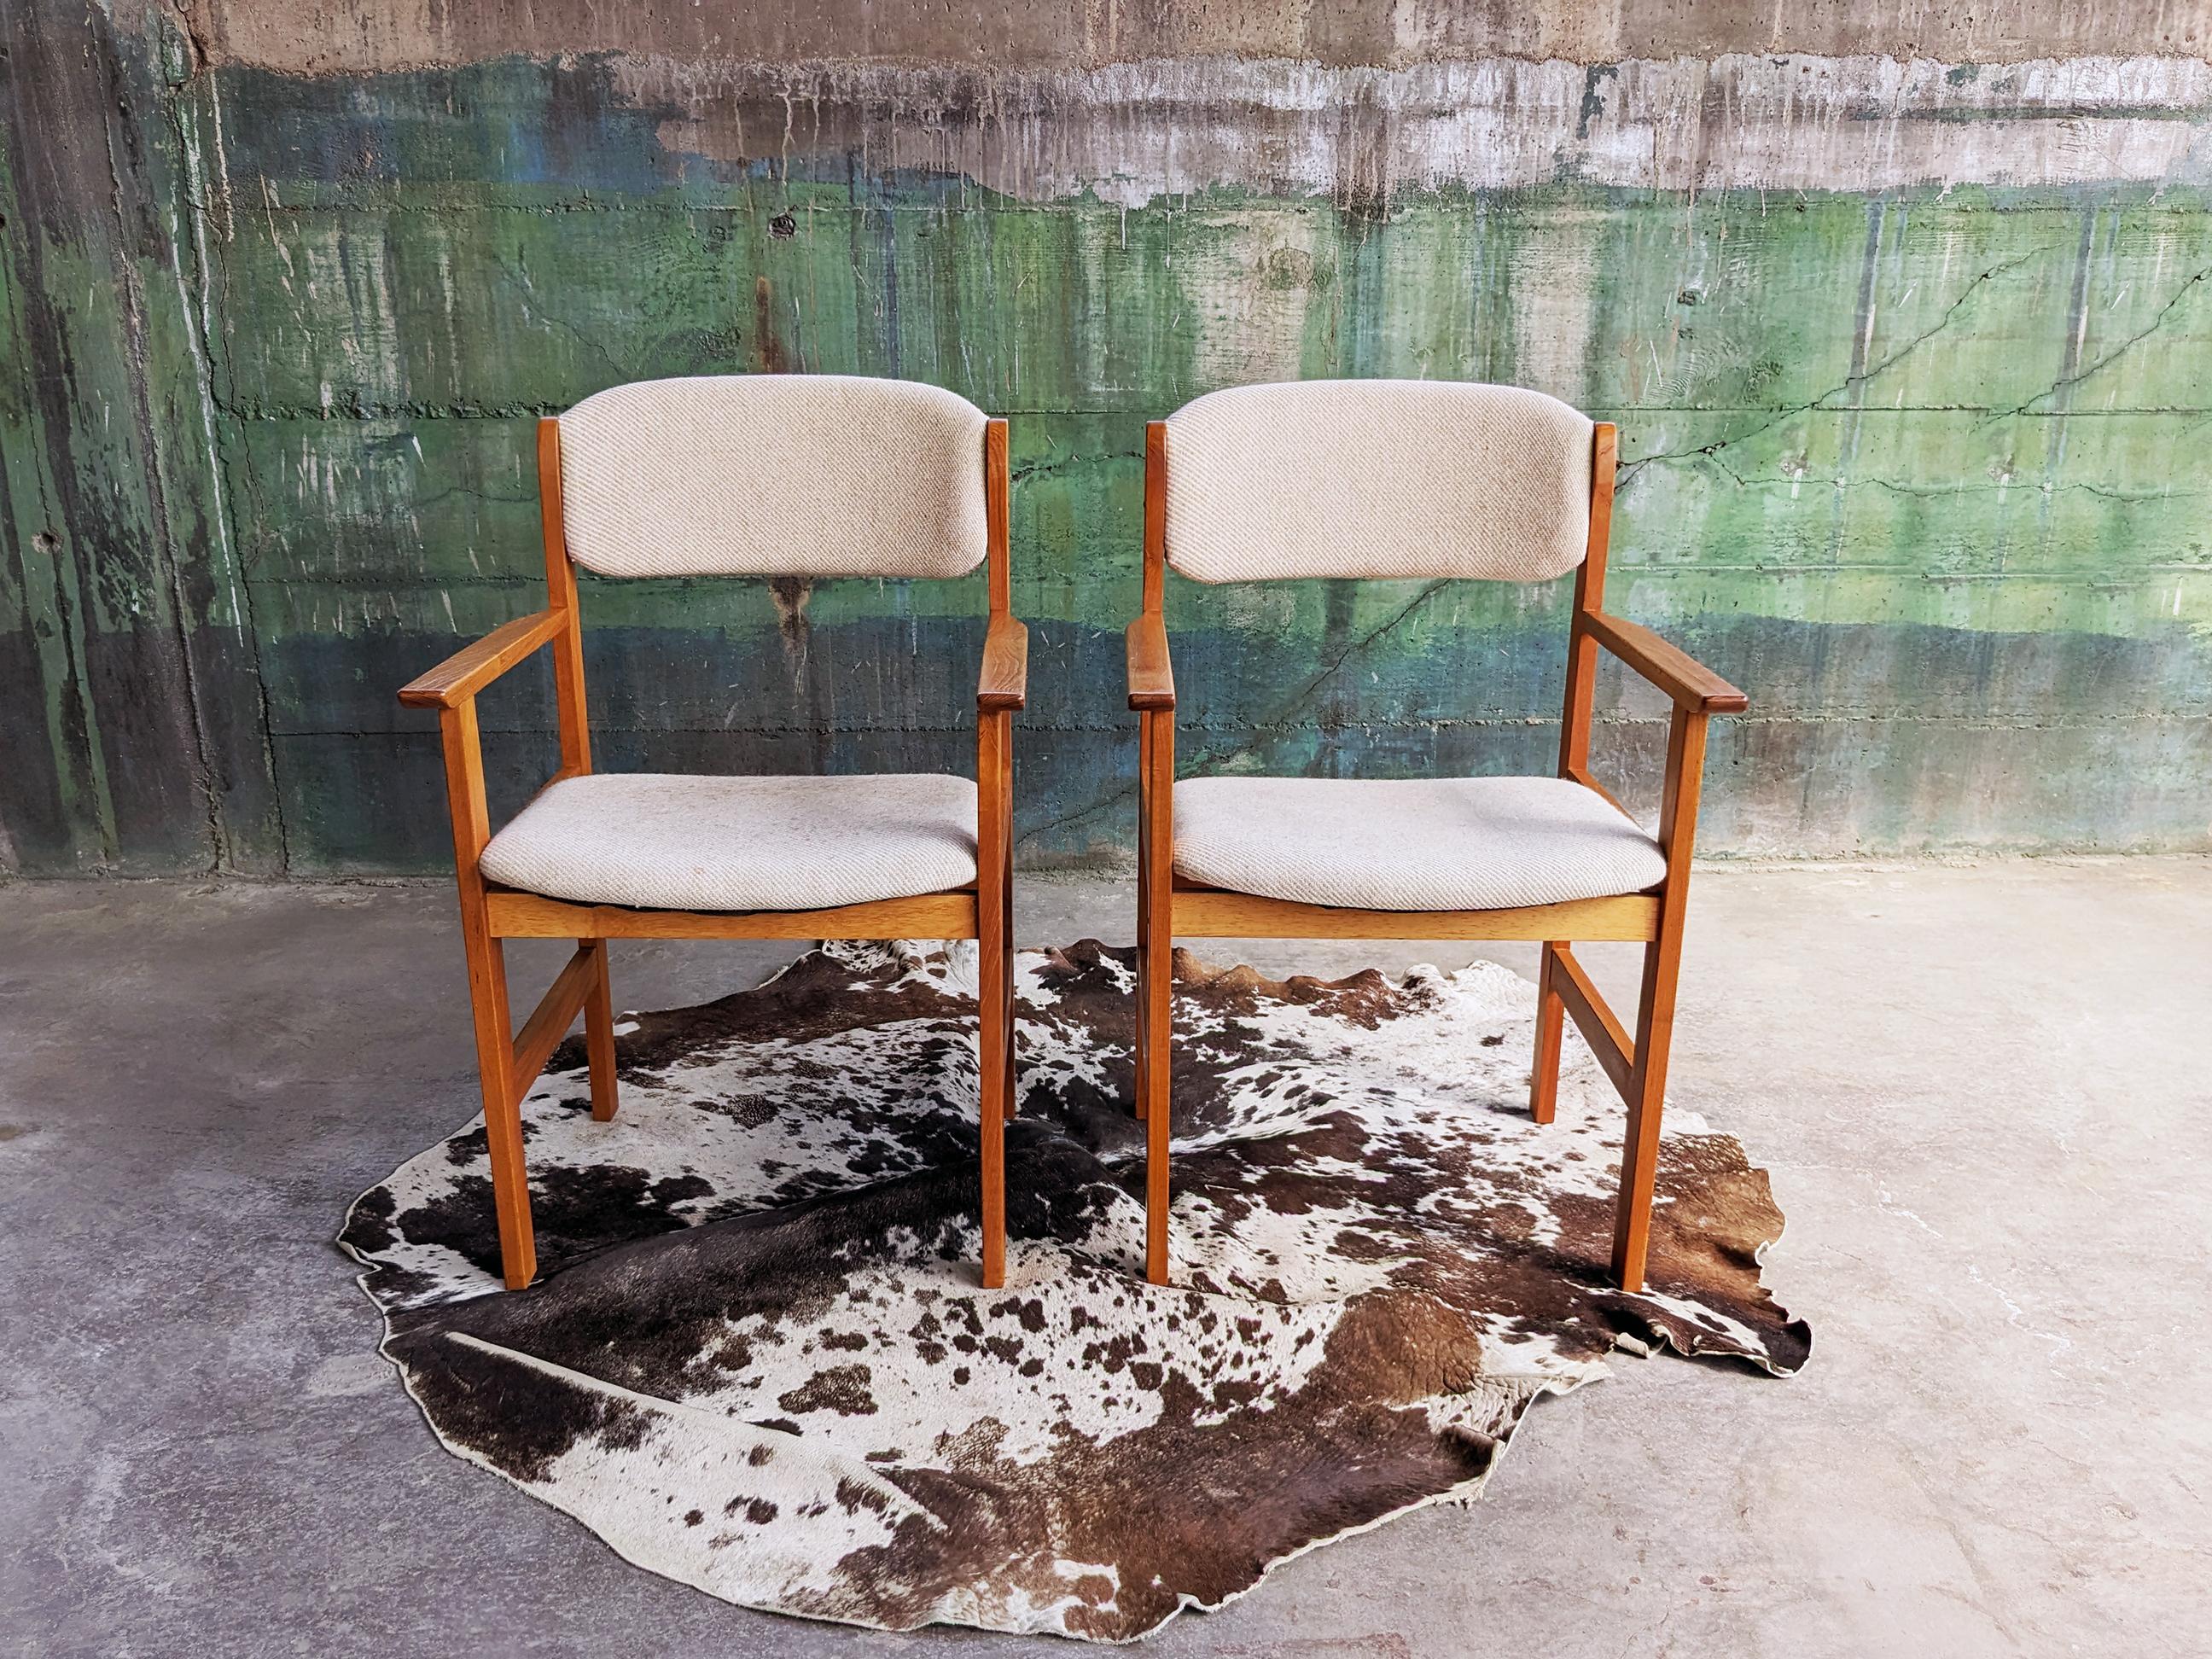 Pair of Mid-Century Danish Modern Teak Chairs by Benny Linden Design.

Feature a solid teak frame in a minimalist Scandinavian Modern Design, and upholstered seats and back rests with wool cream colored fabric.

The teak frames are in excellent